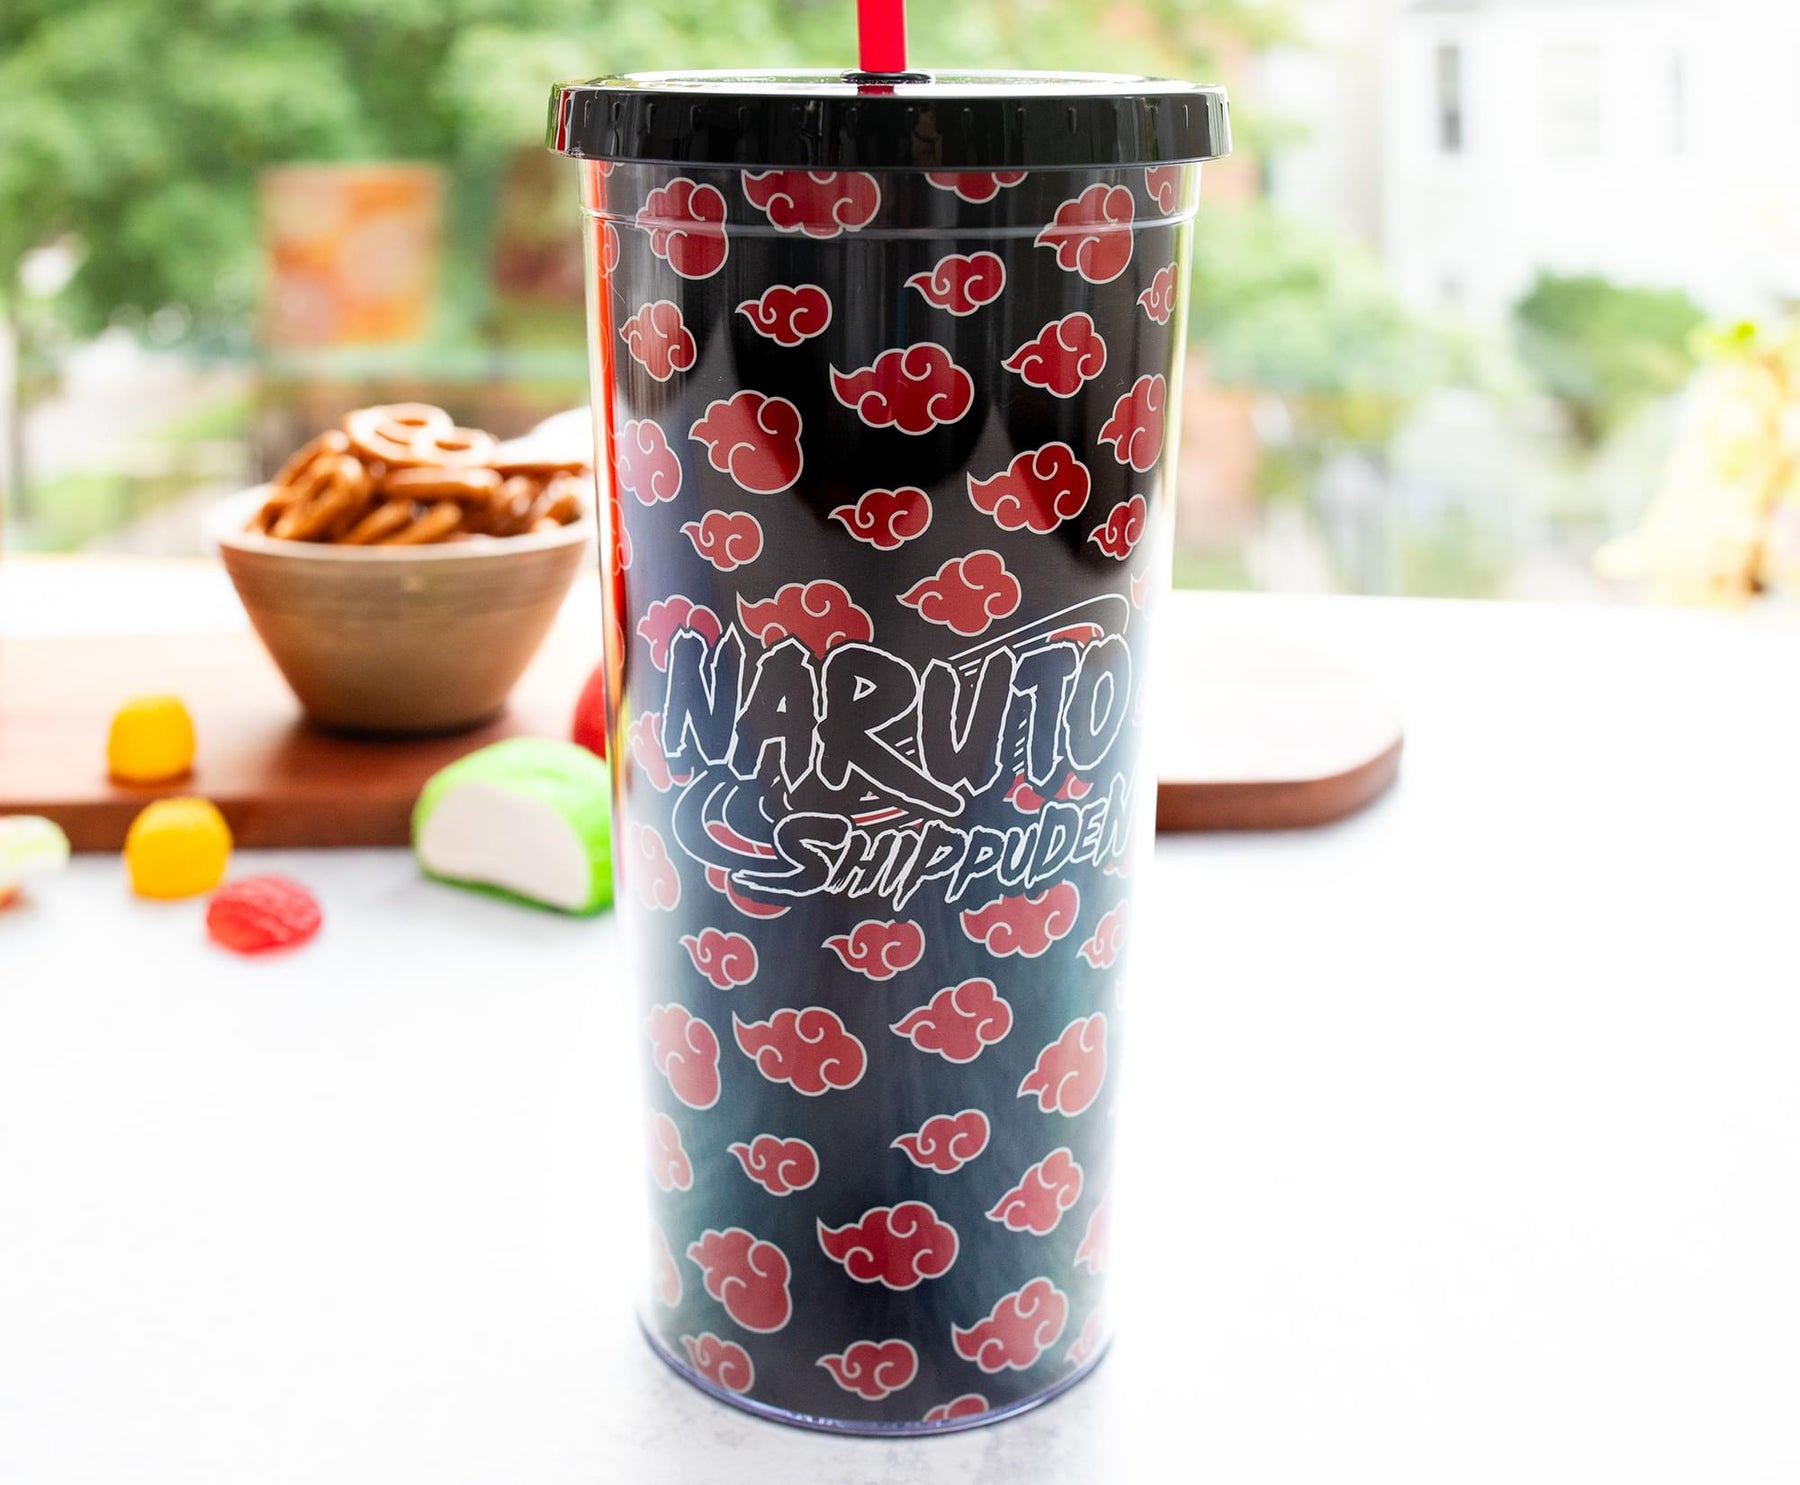 Naruto Shippuden Akatsuki 20-Ounce Carnival Cup With Lid and Straw